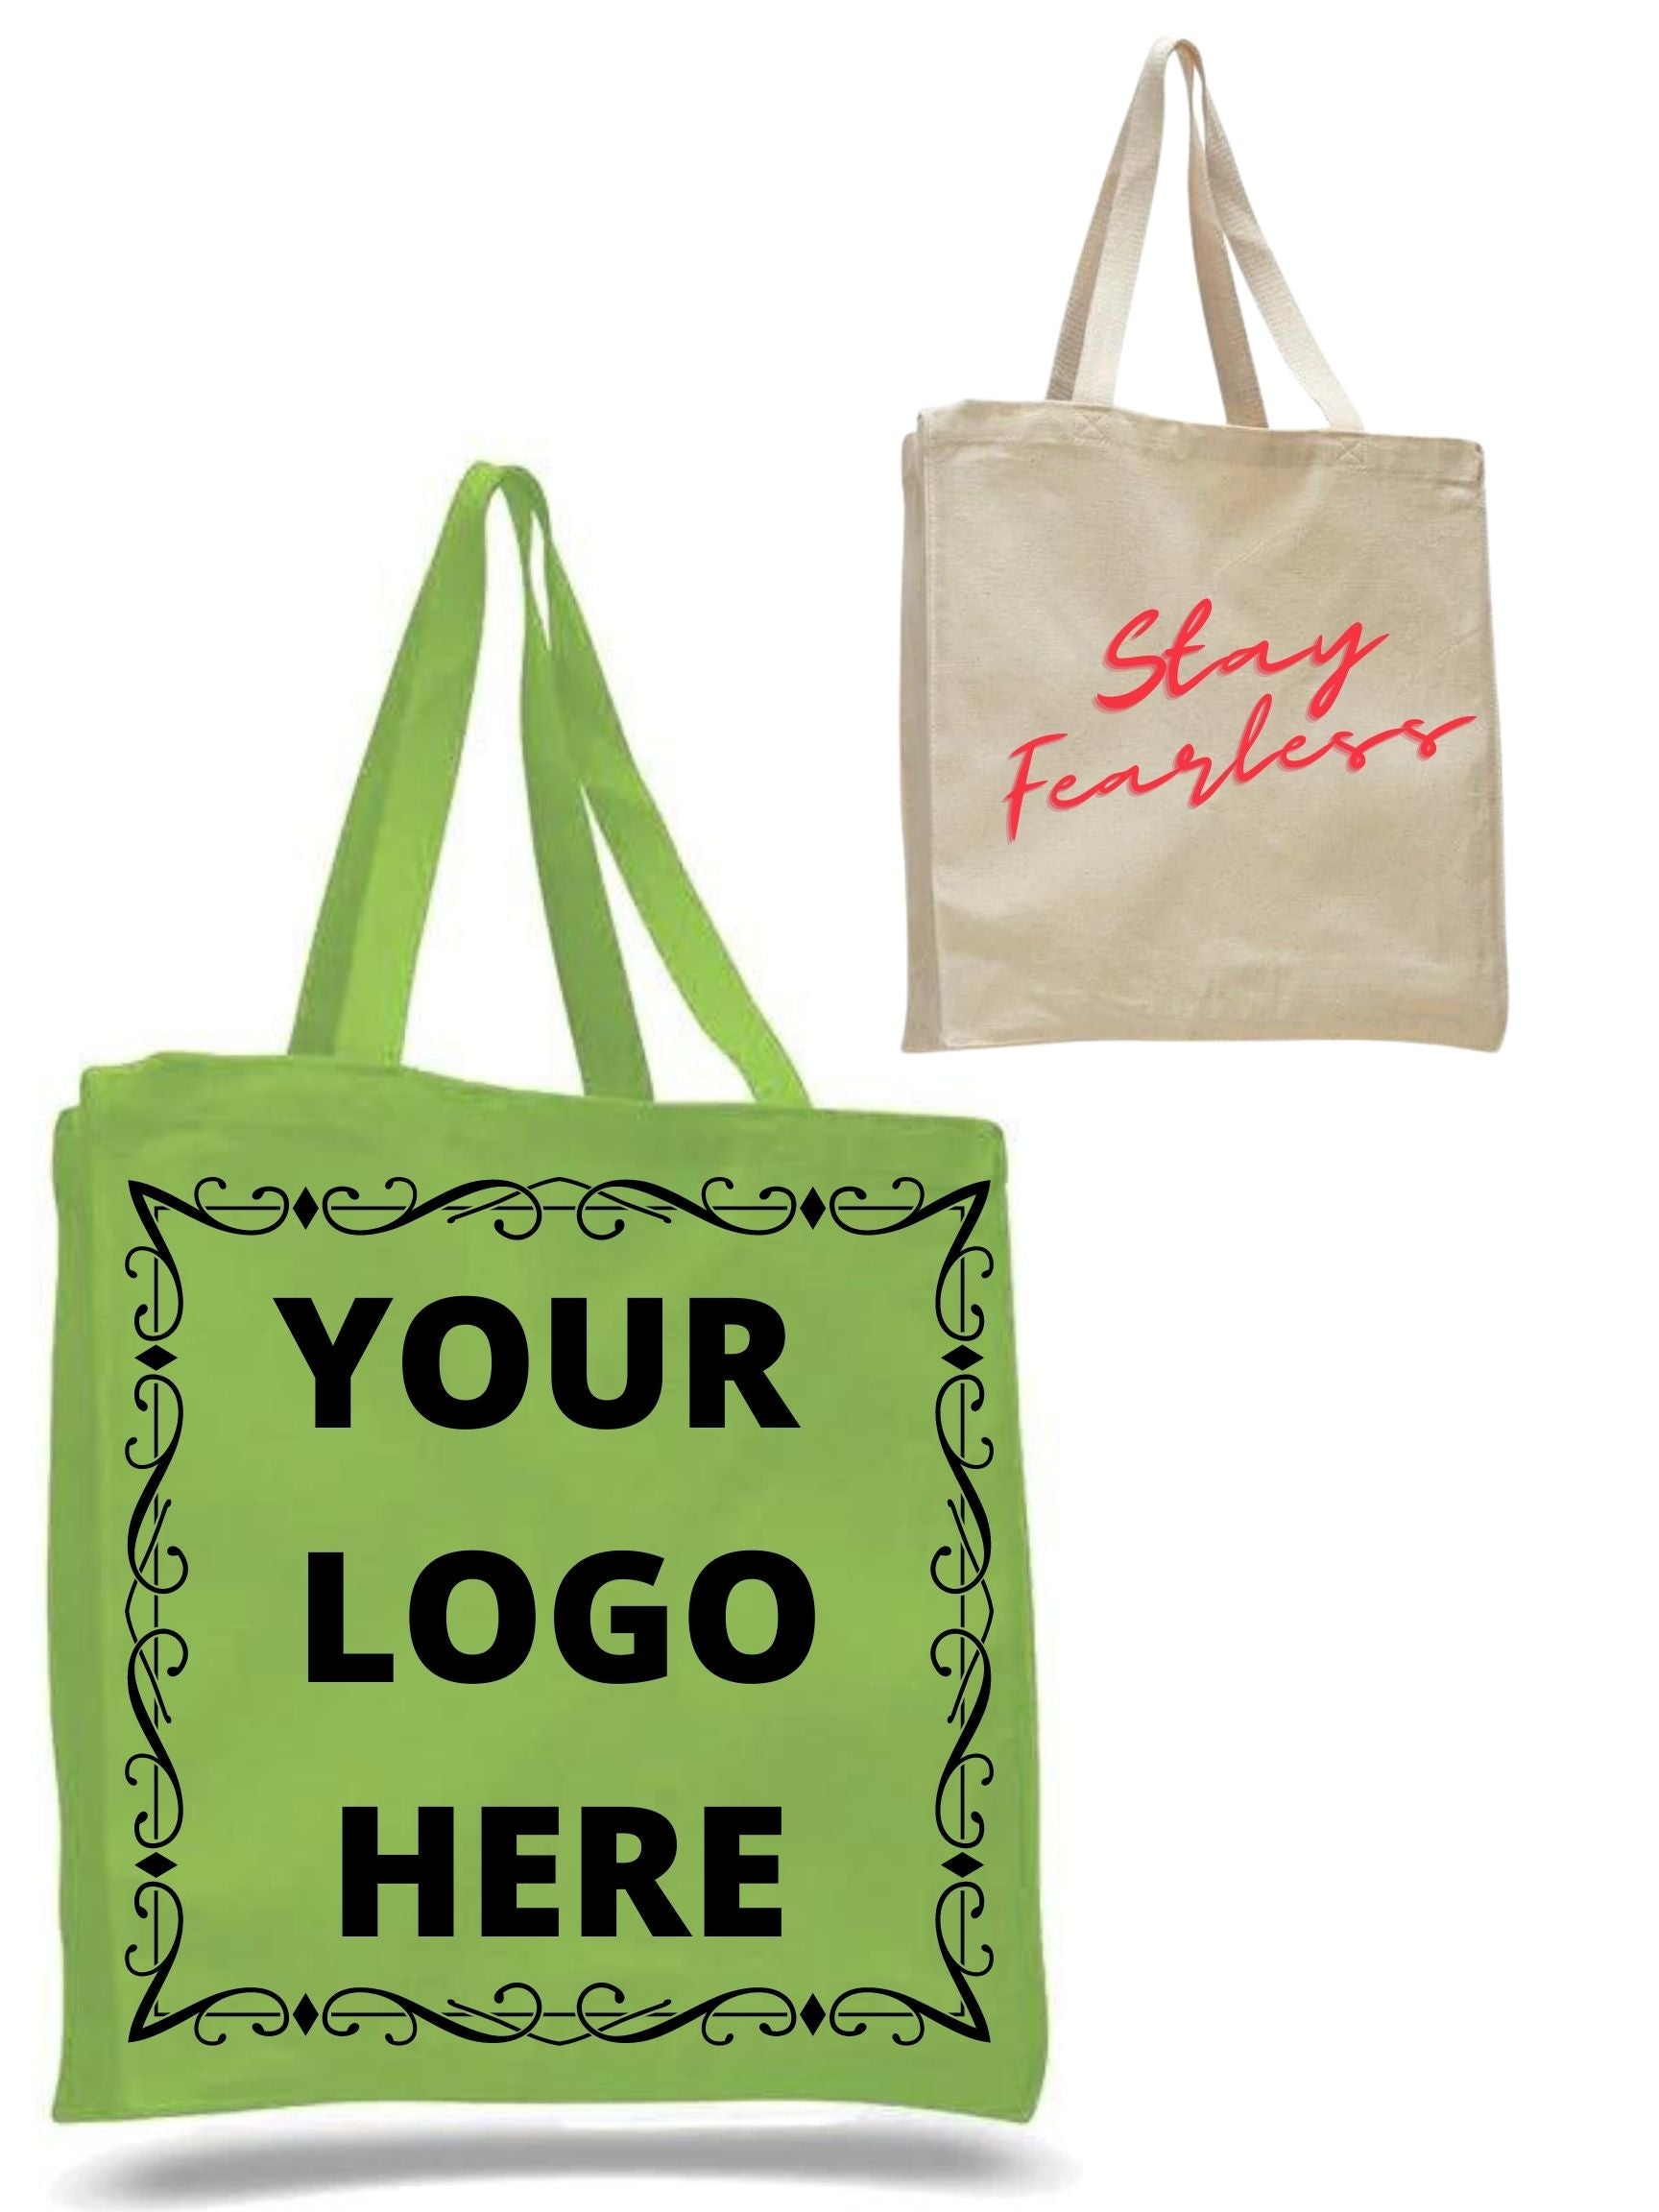 How Custom Tote Bags Can Help You Improve Your Business